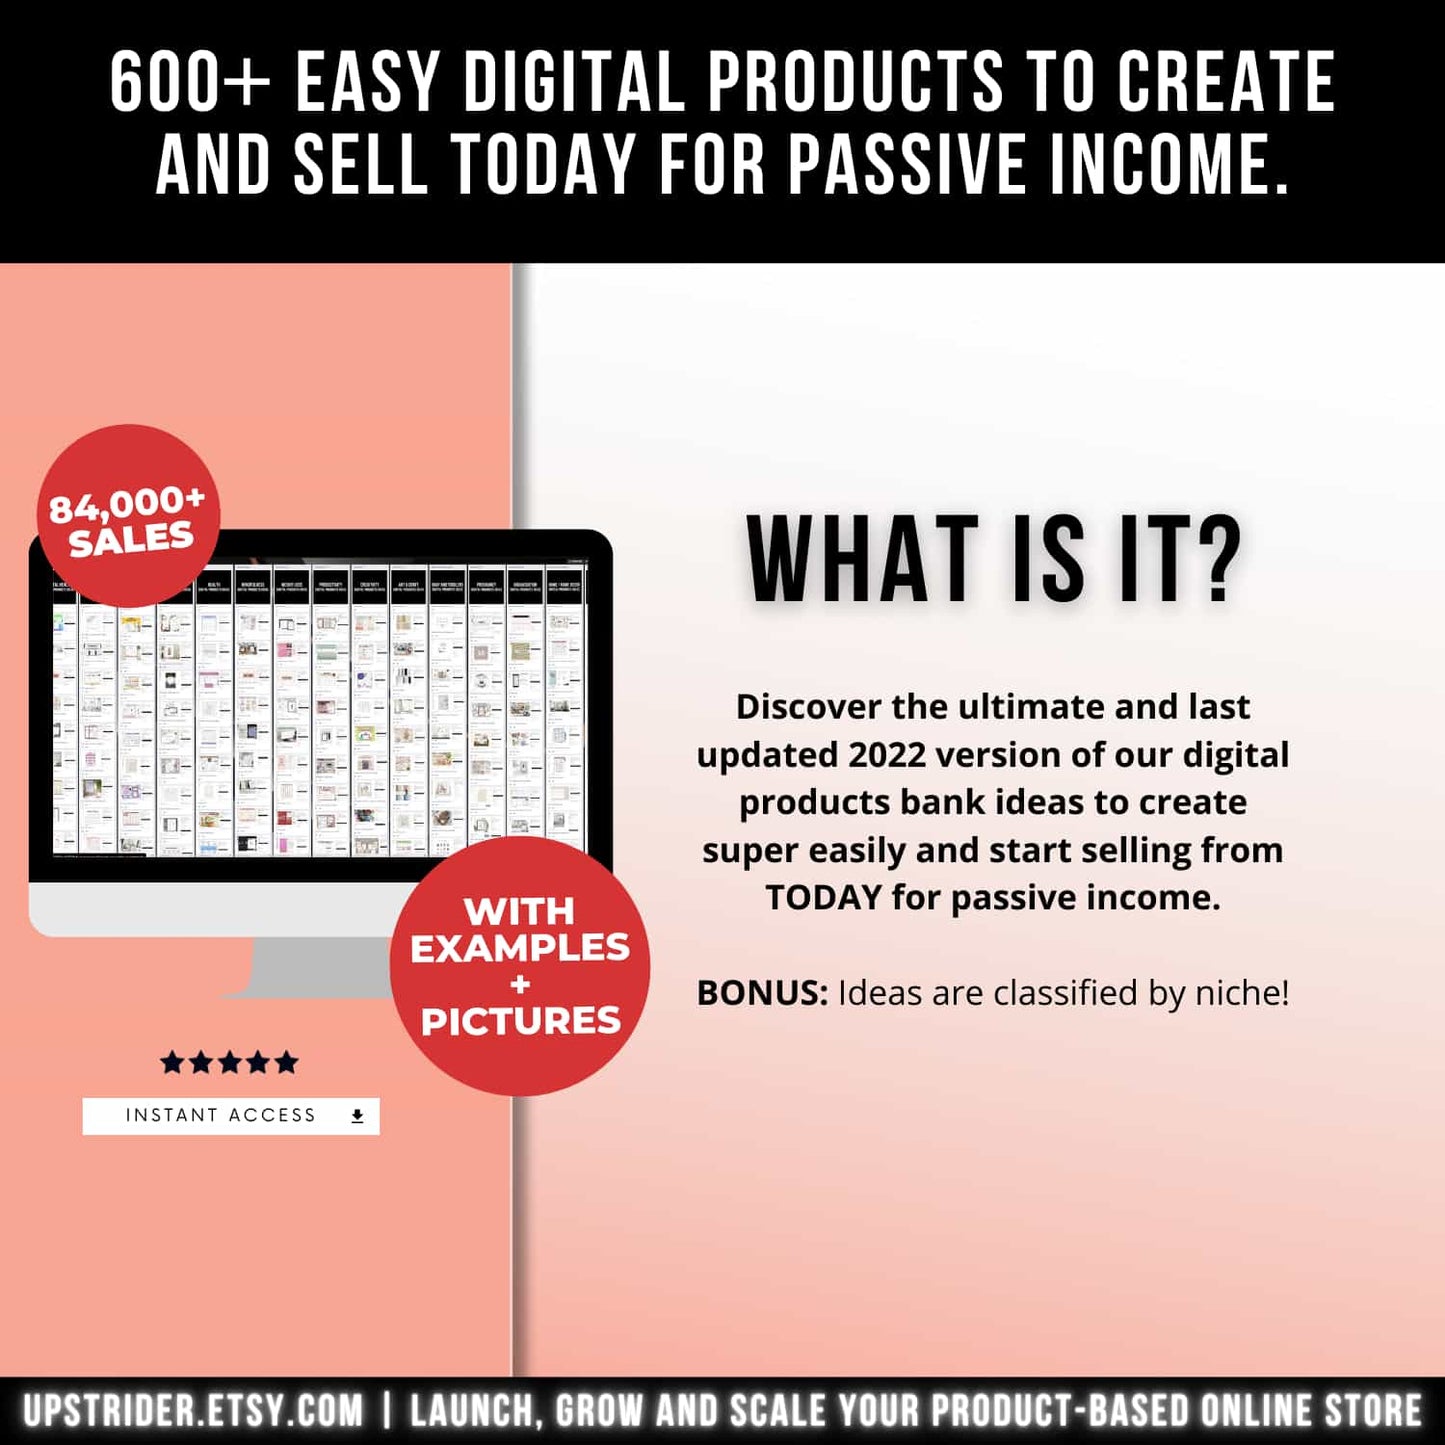 600+ Digital Products Ideas To Create And Sell Today For Passive Income, Etsy Digital Downloads Small Business Ideas and Bestsellers to Sell